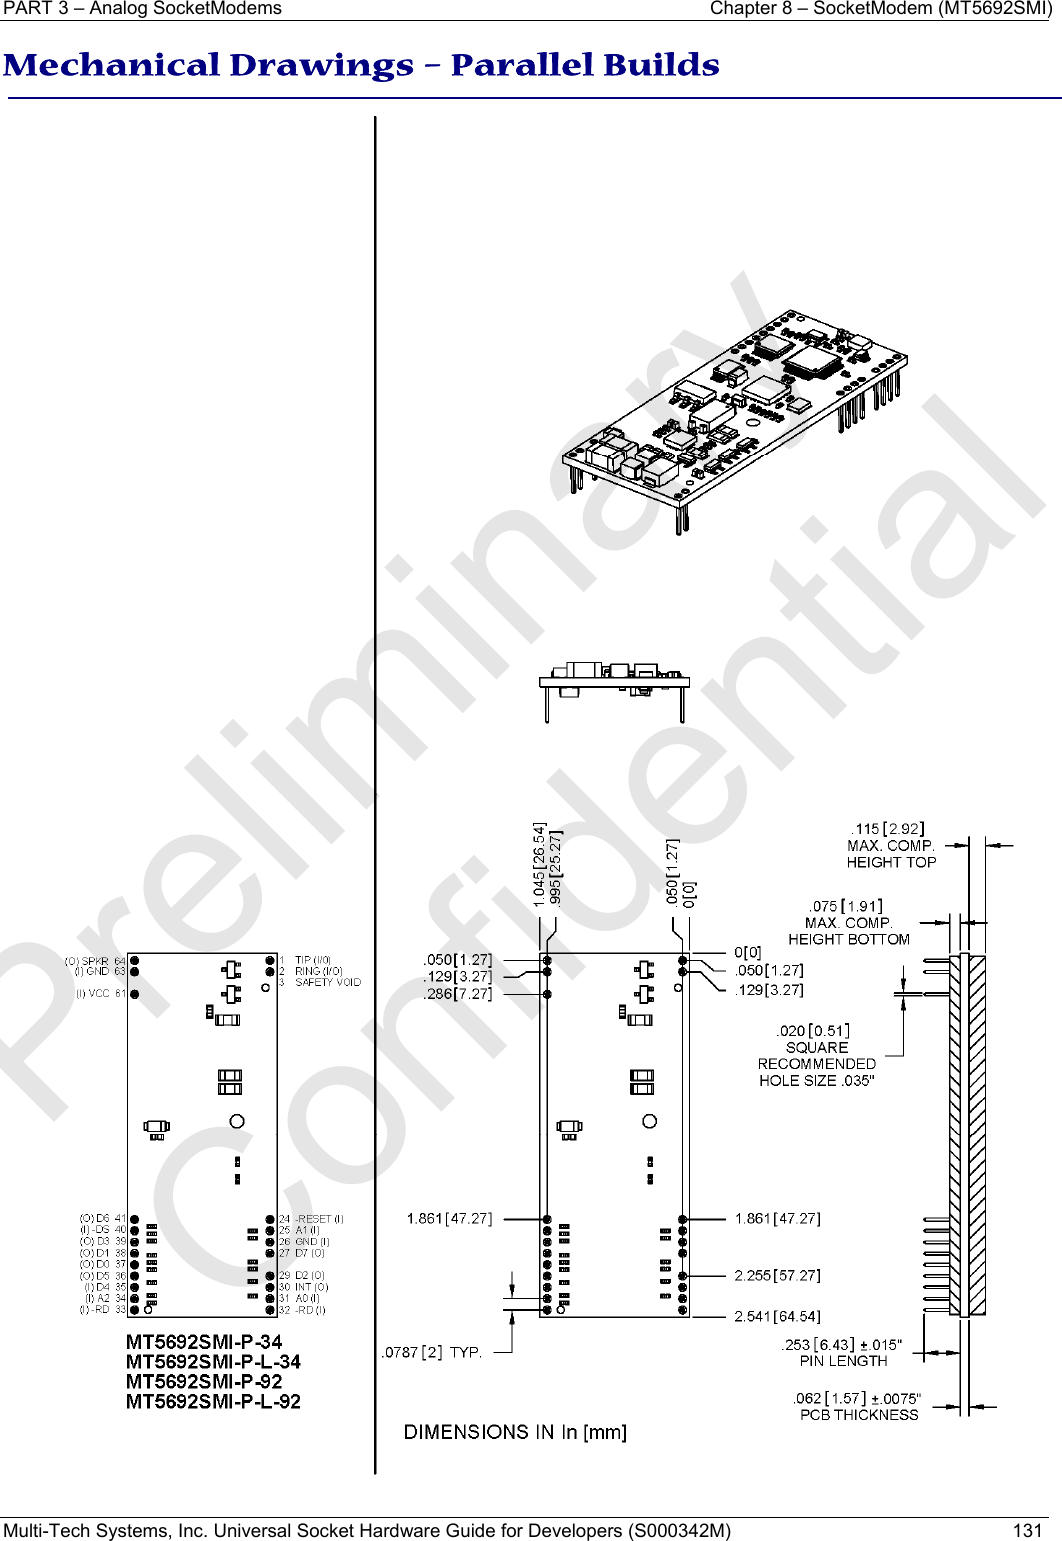 PART 3 – Analog SocketModems    Chapter 8 – SocketModem (MT5692SMI) Multi-Tech Systems, Inc. Universal Socket Hardware Guide for Developers (S000342M)  131  Mechanical Drawings – Parallel Builds     Preliminary  Confidential